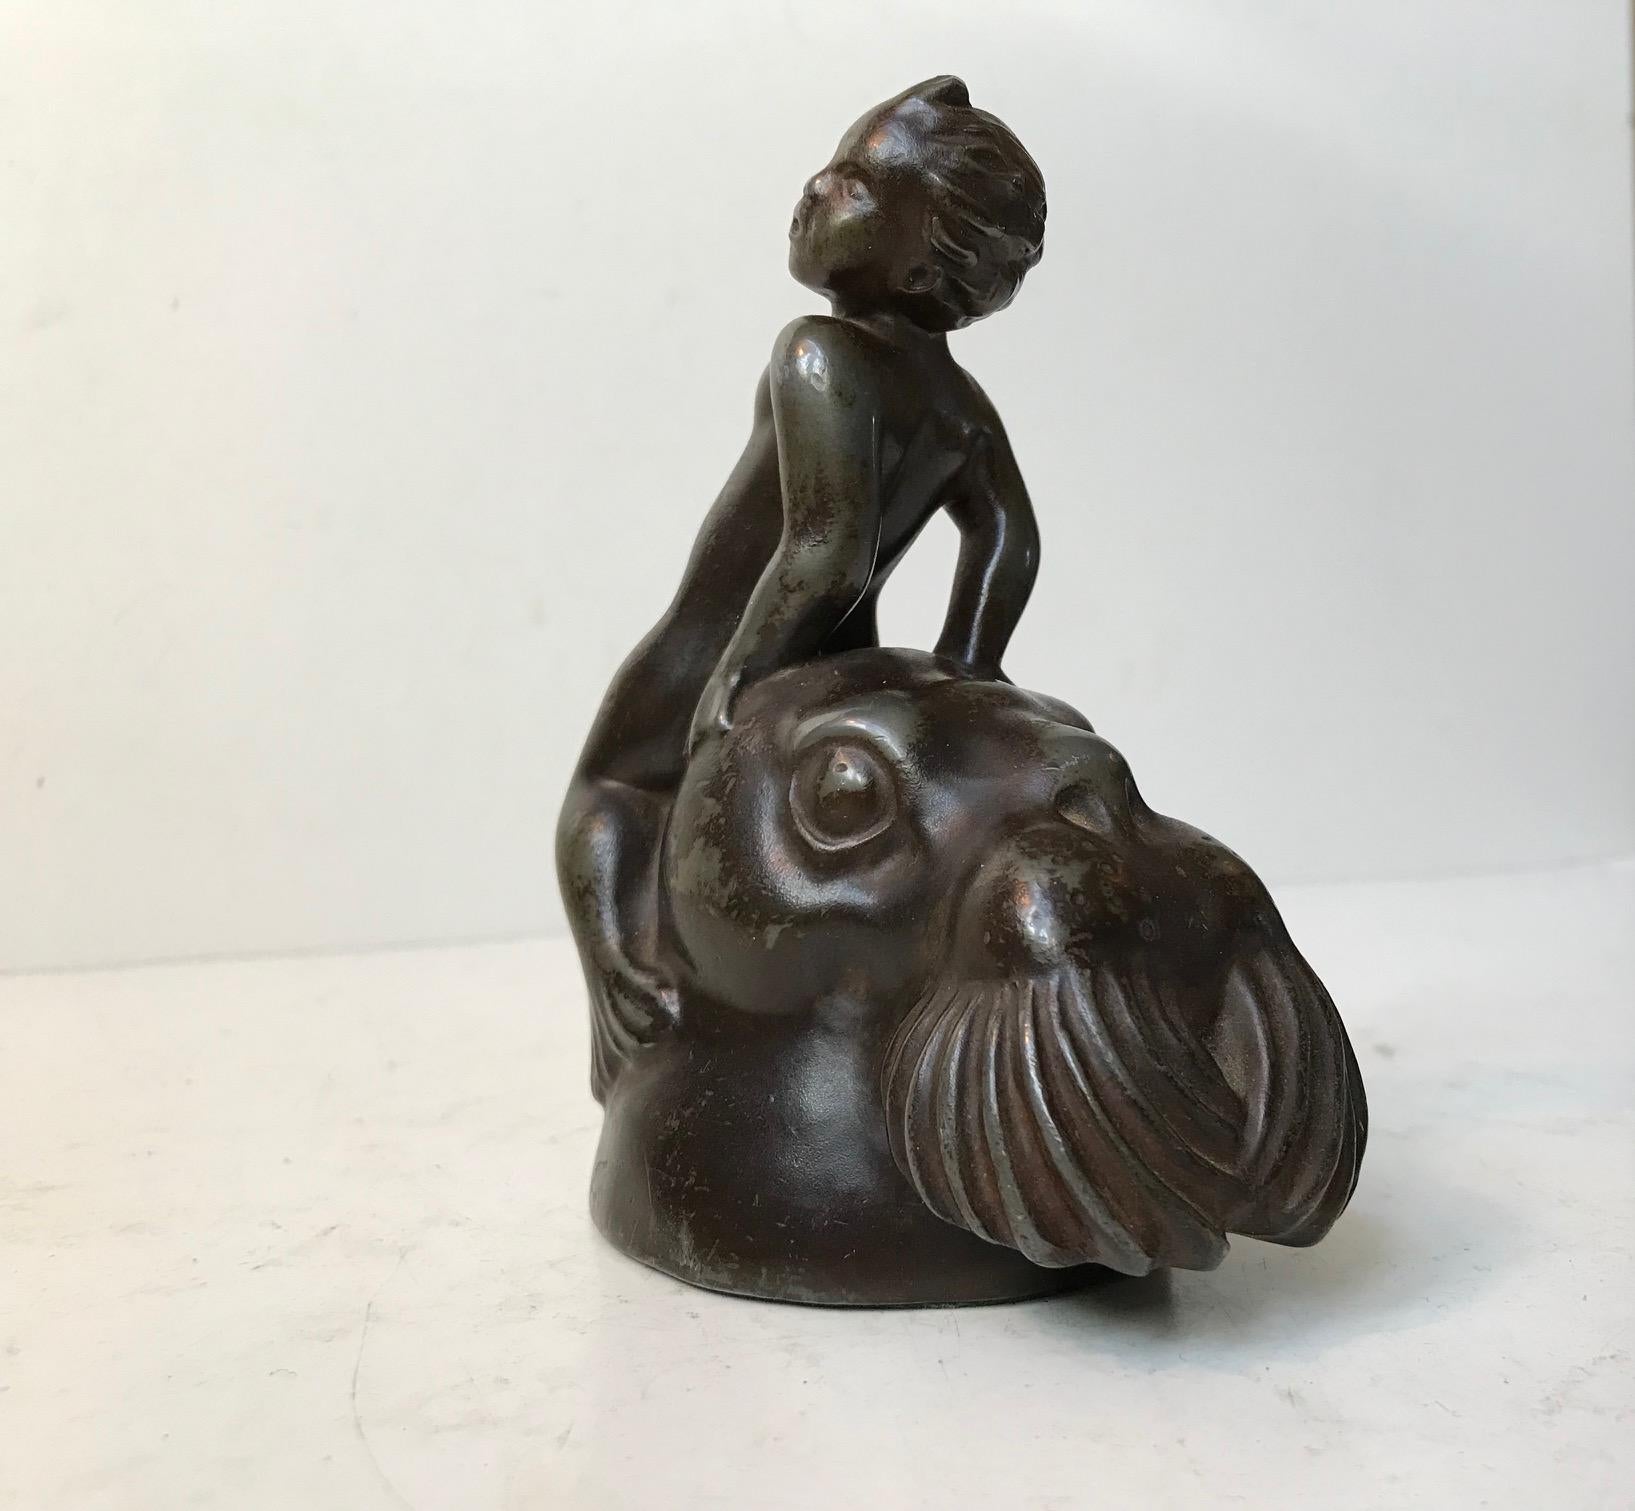 - Mythological figurine by Just Andersen designed, circa 1930
- Composed of Just Andersen's own alloy called Disko Metal
- The figurine is signed to the side: Just A.